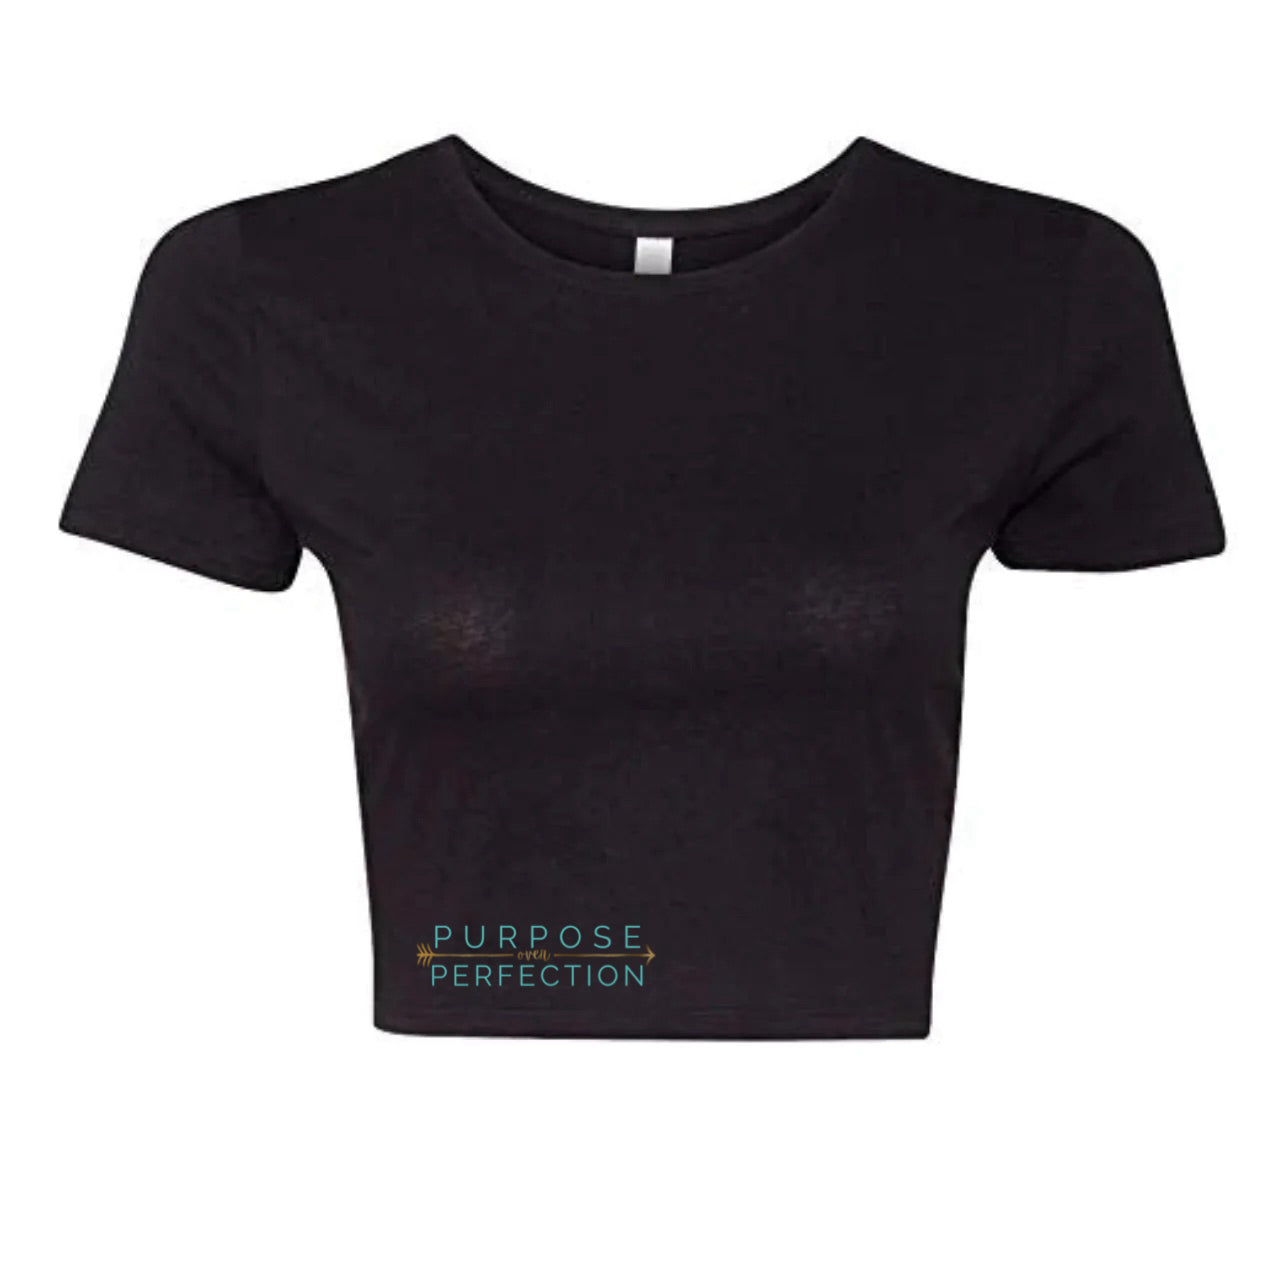 Purpose Over Perfection Crop Tee